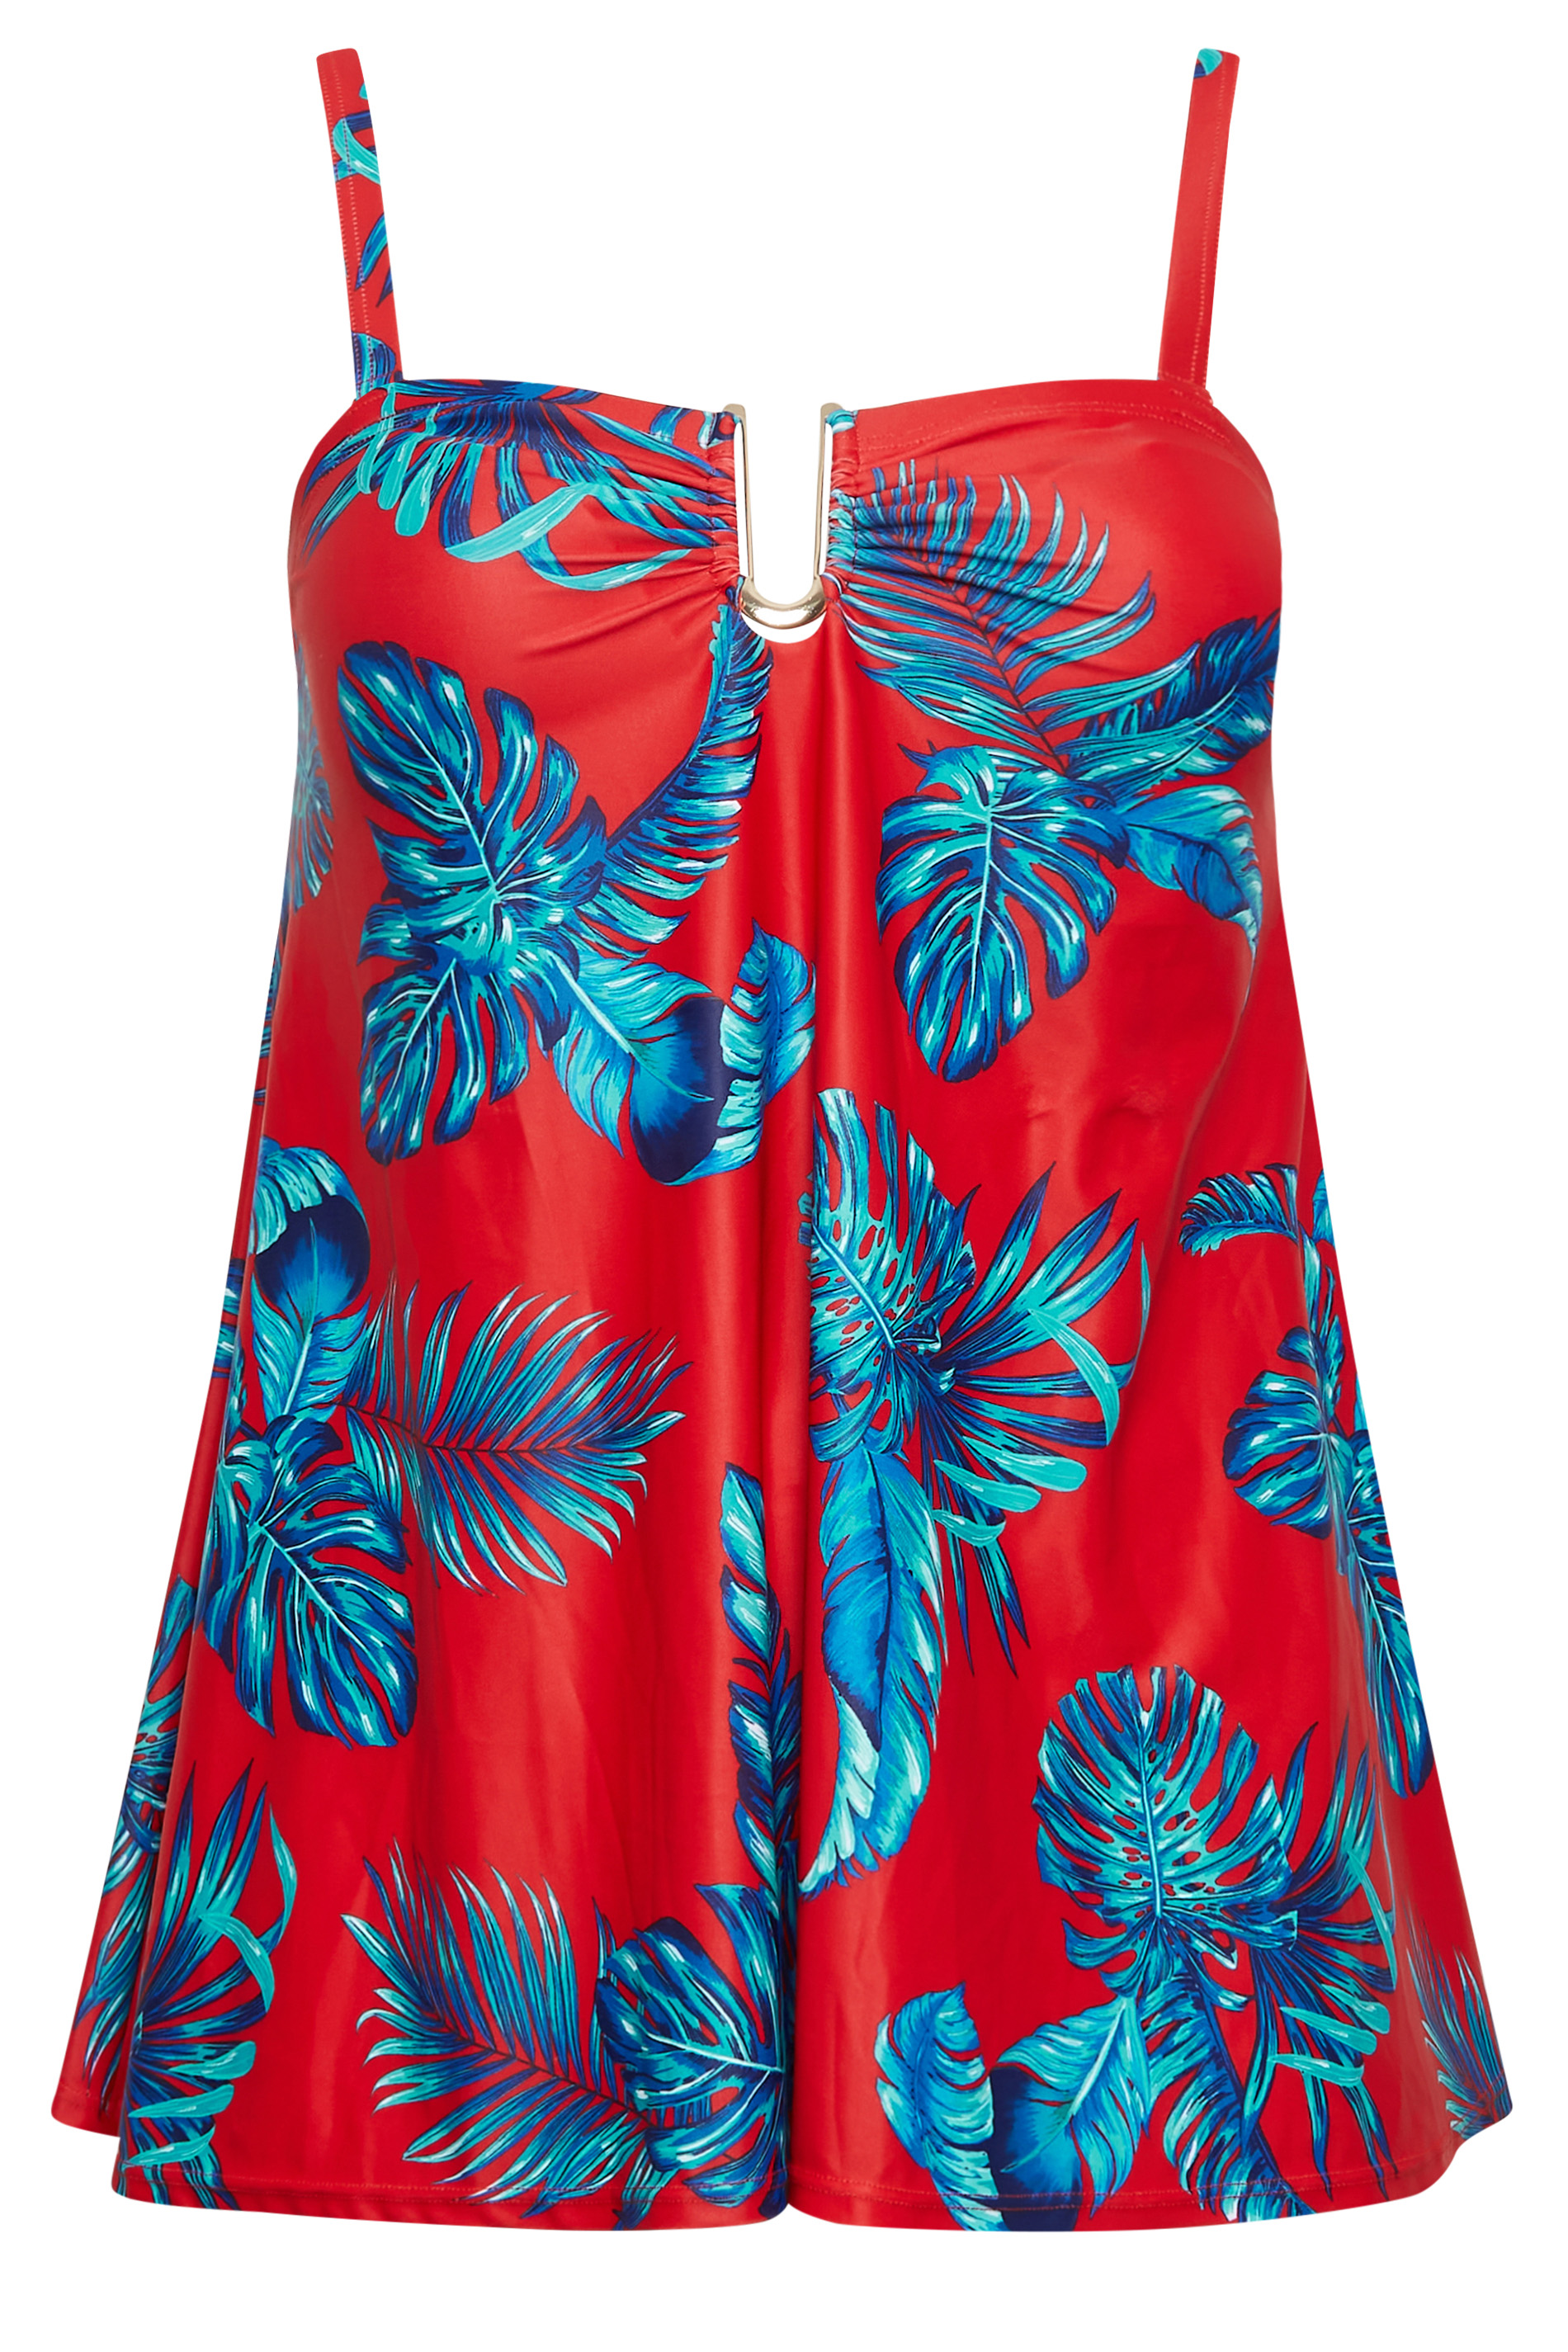 YOURS Plus Size Blue Floral Print Tankini Top